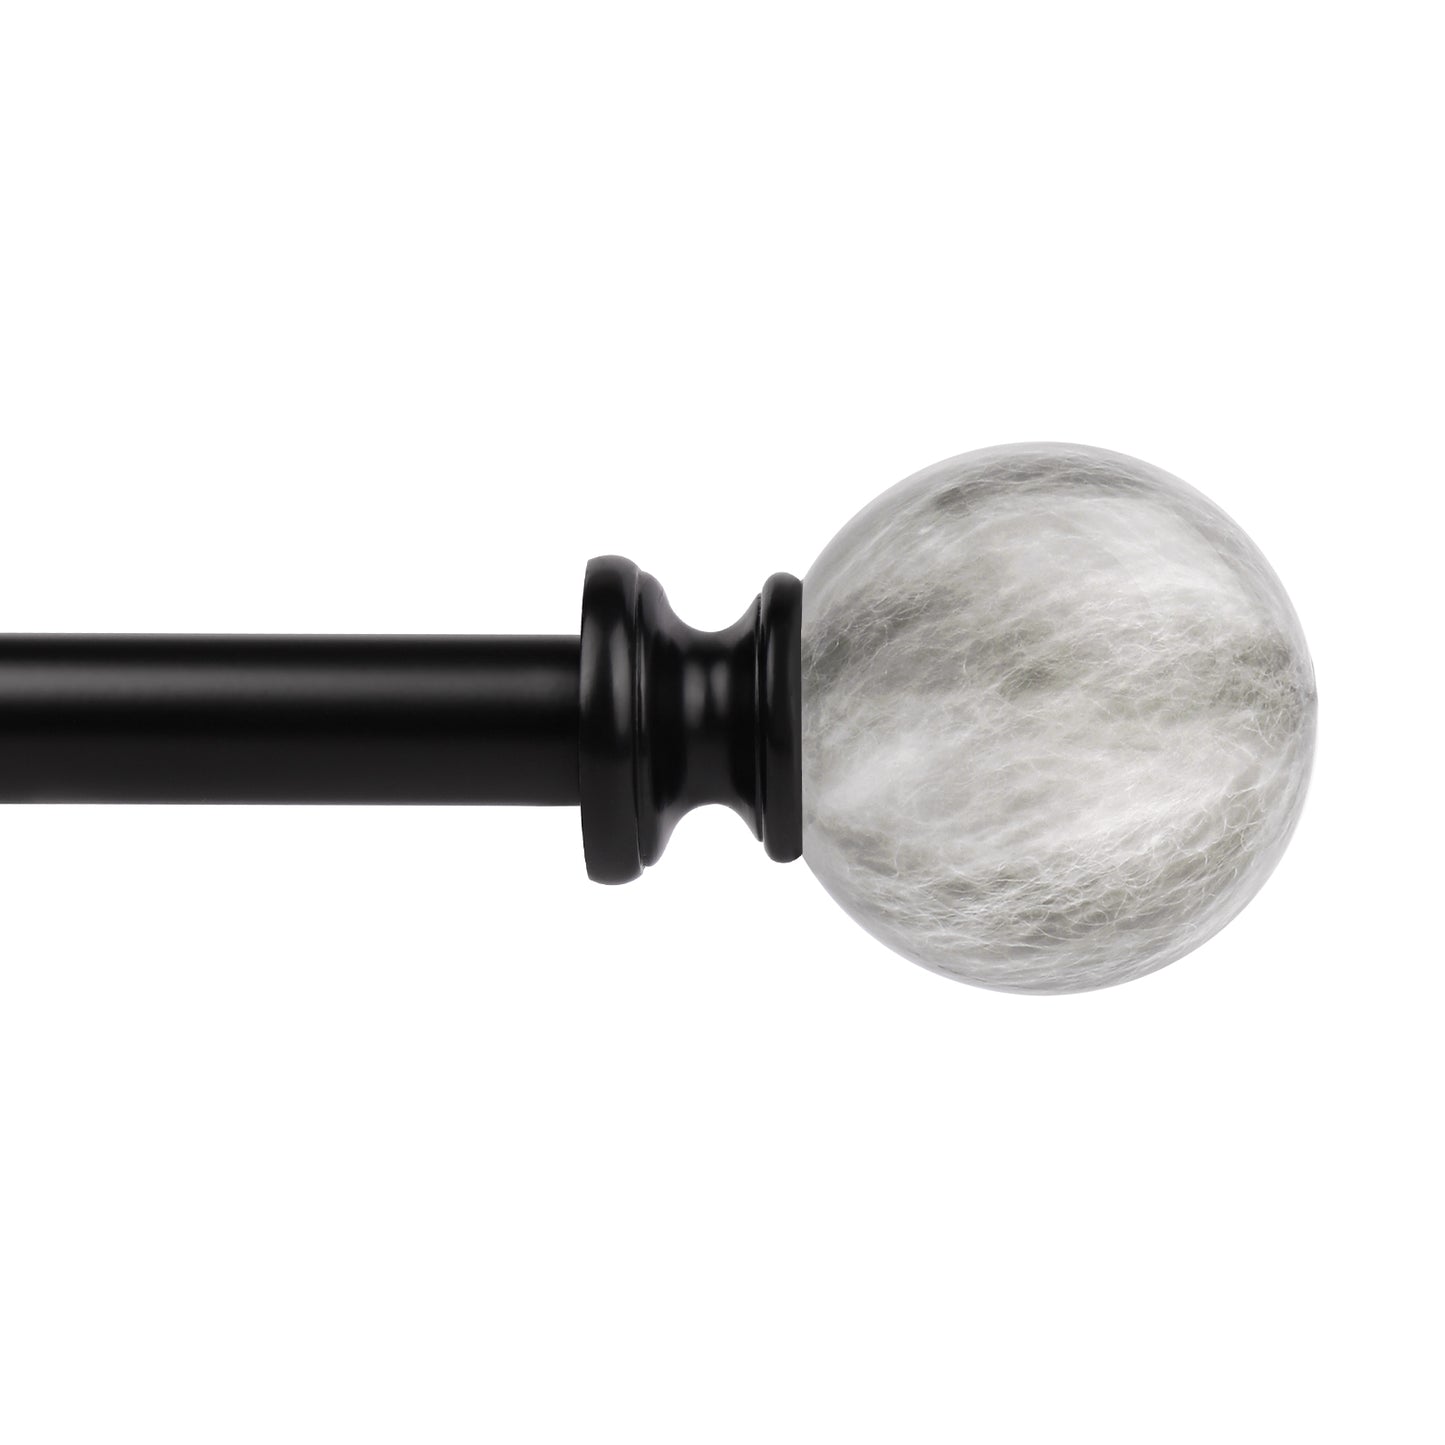 3/4" Diameter Window Curtain Rod with Ball Finials, Adjusts from 22" to 42"